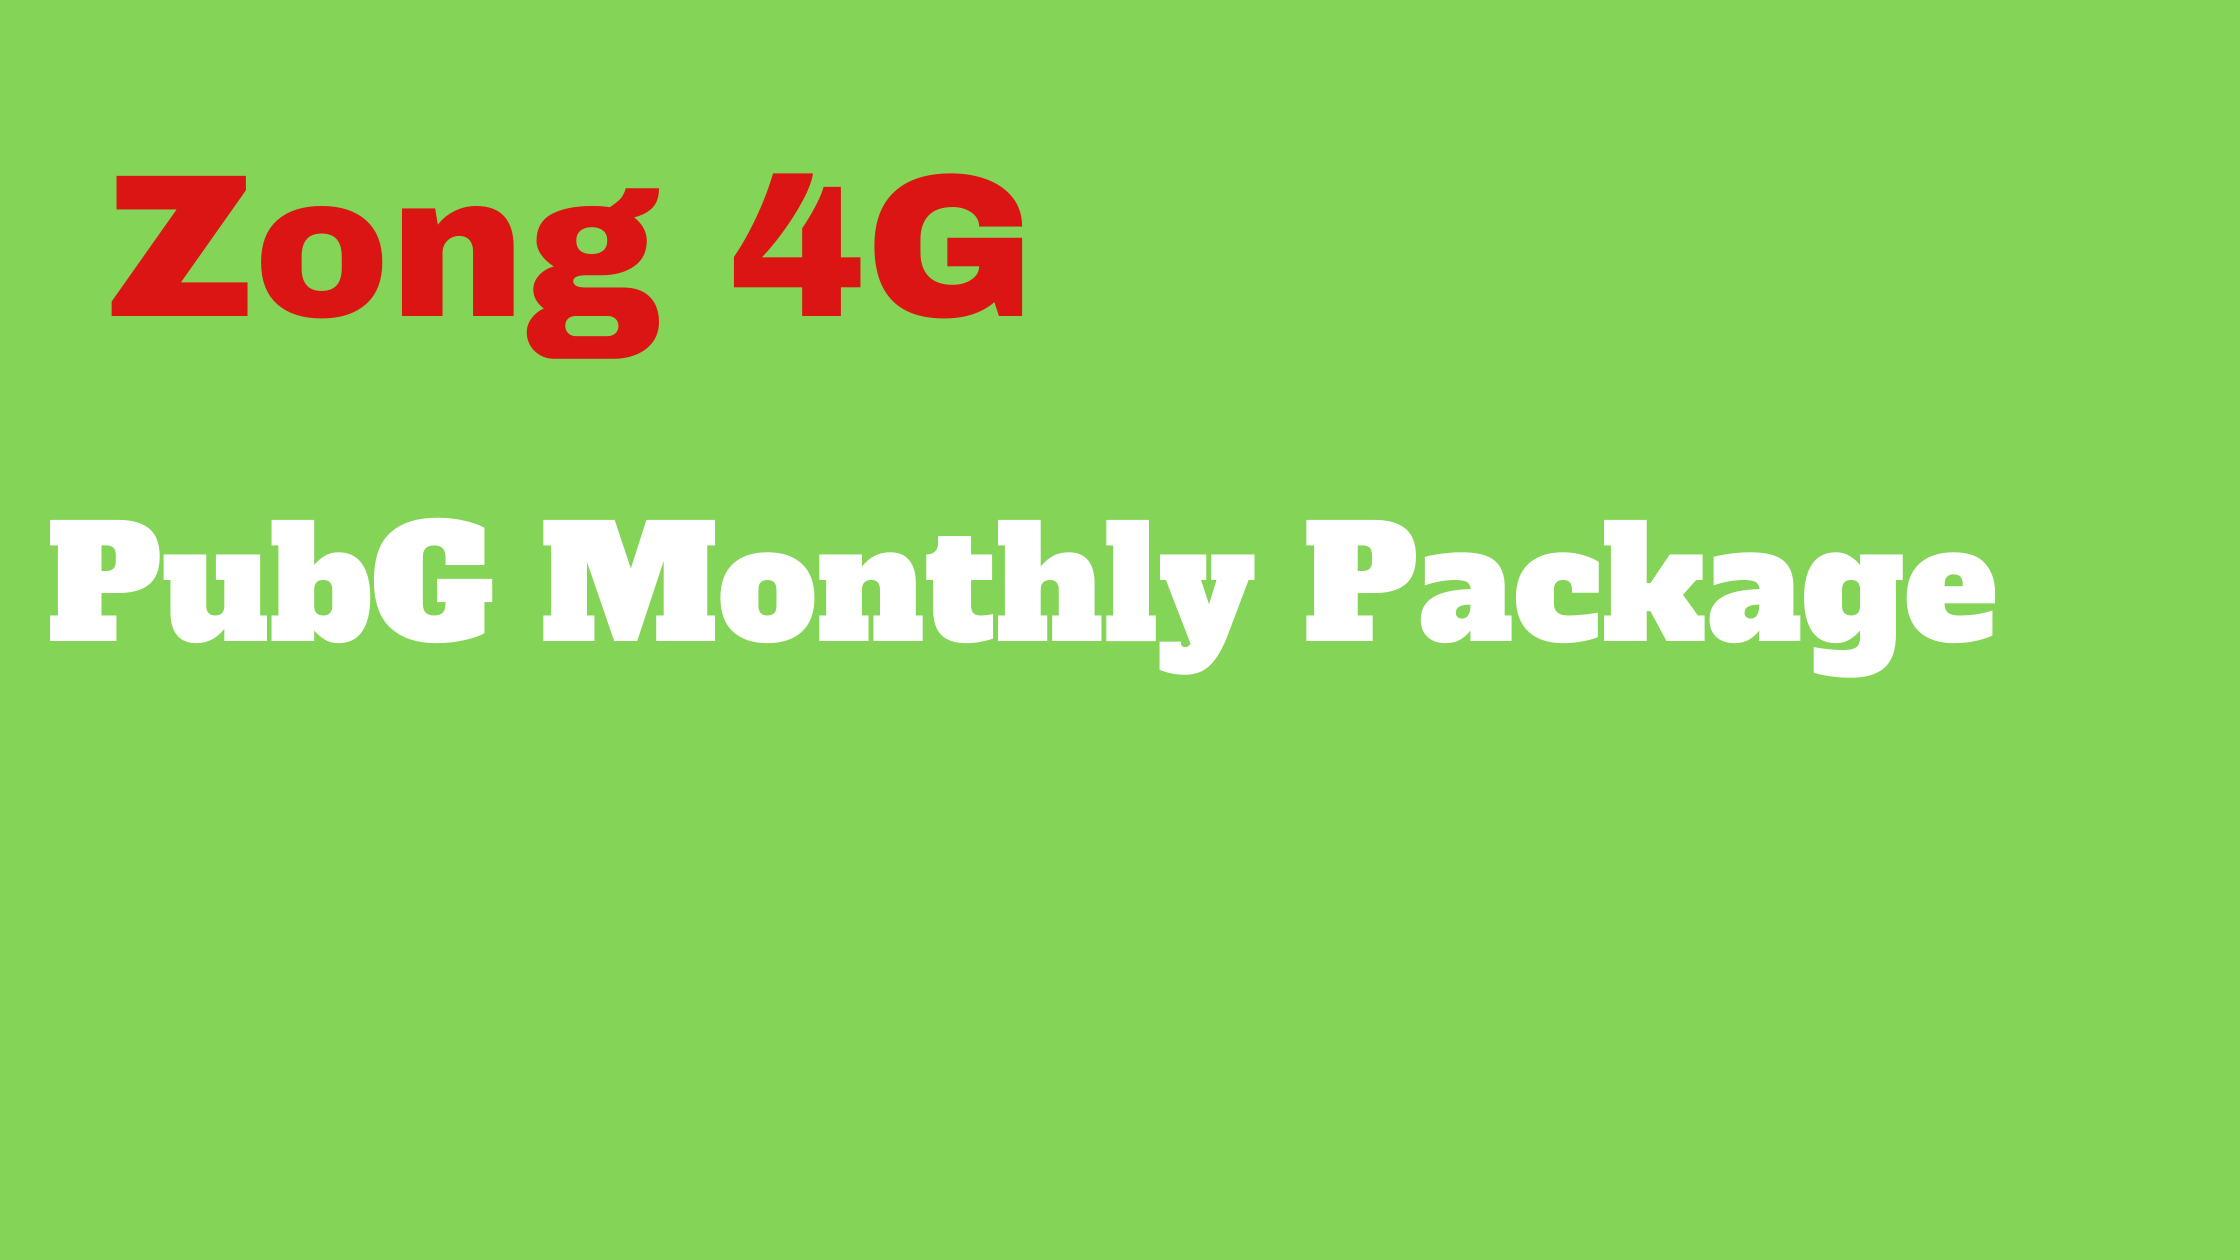 Zong Pubg Package Monthly Code